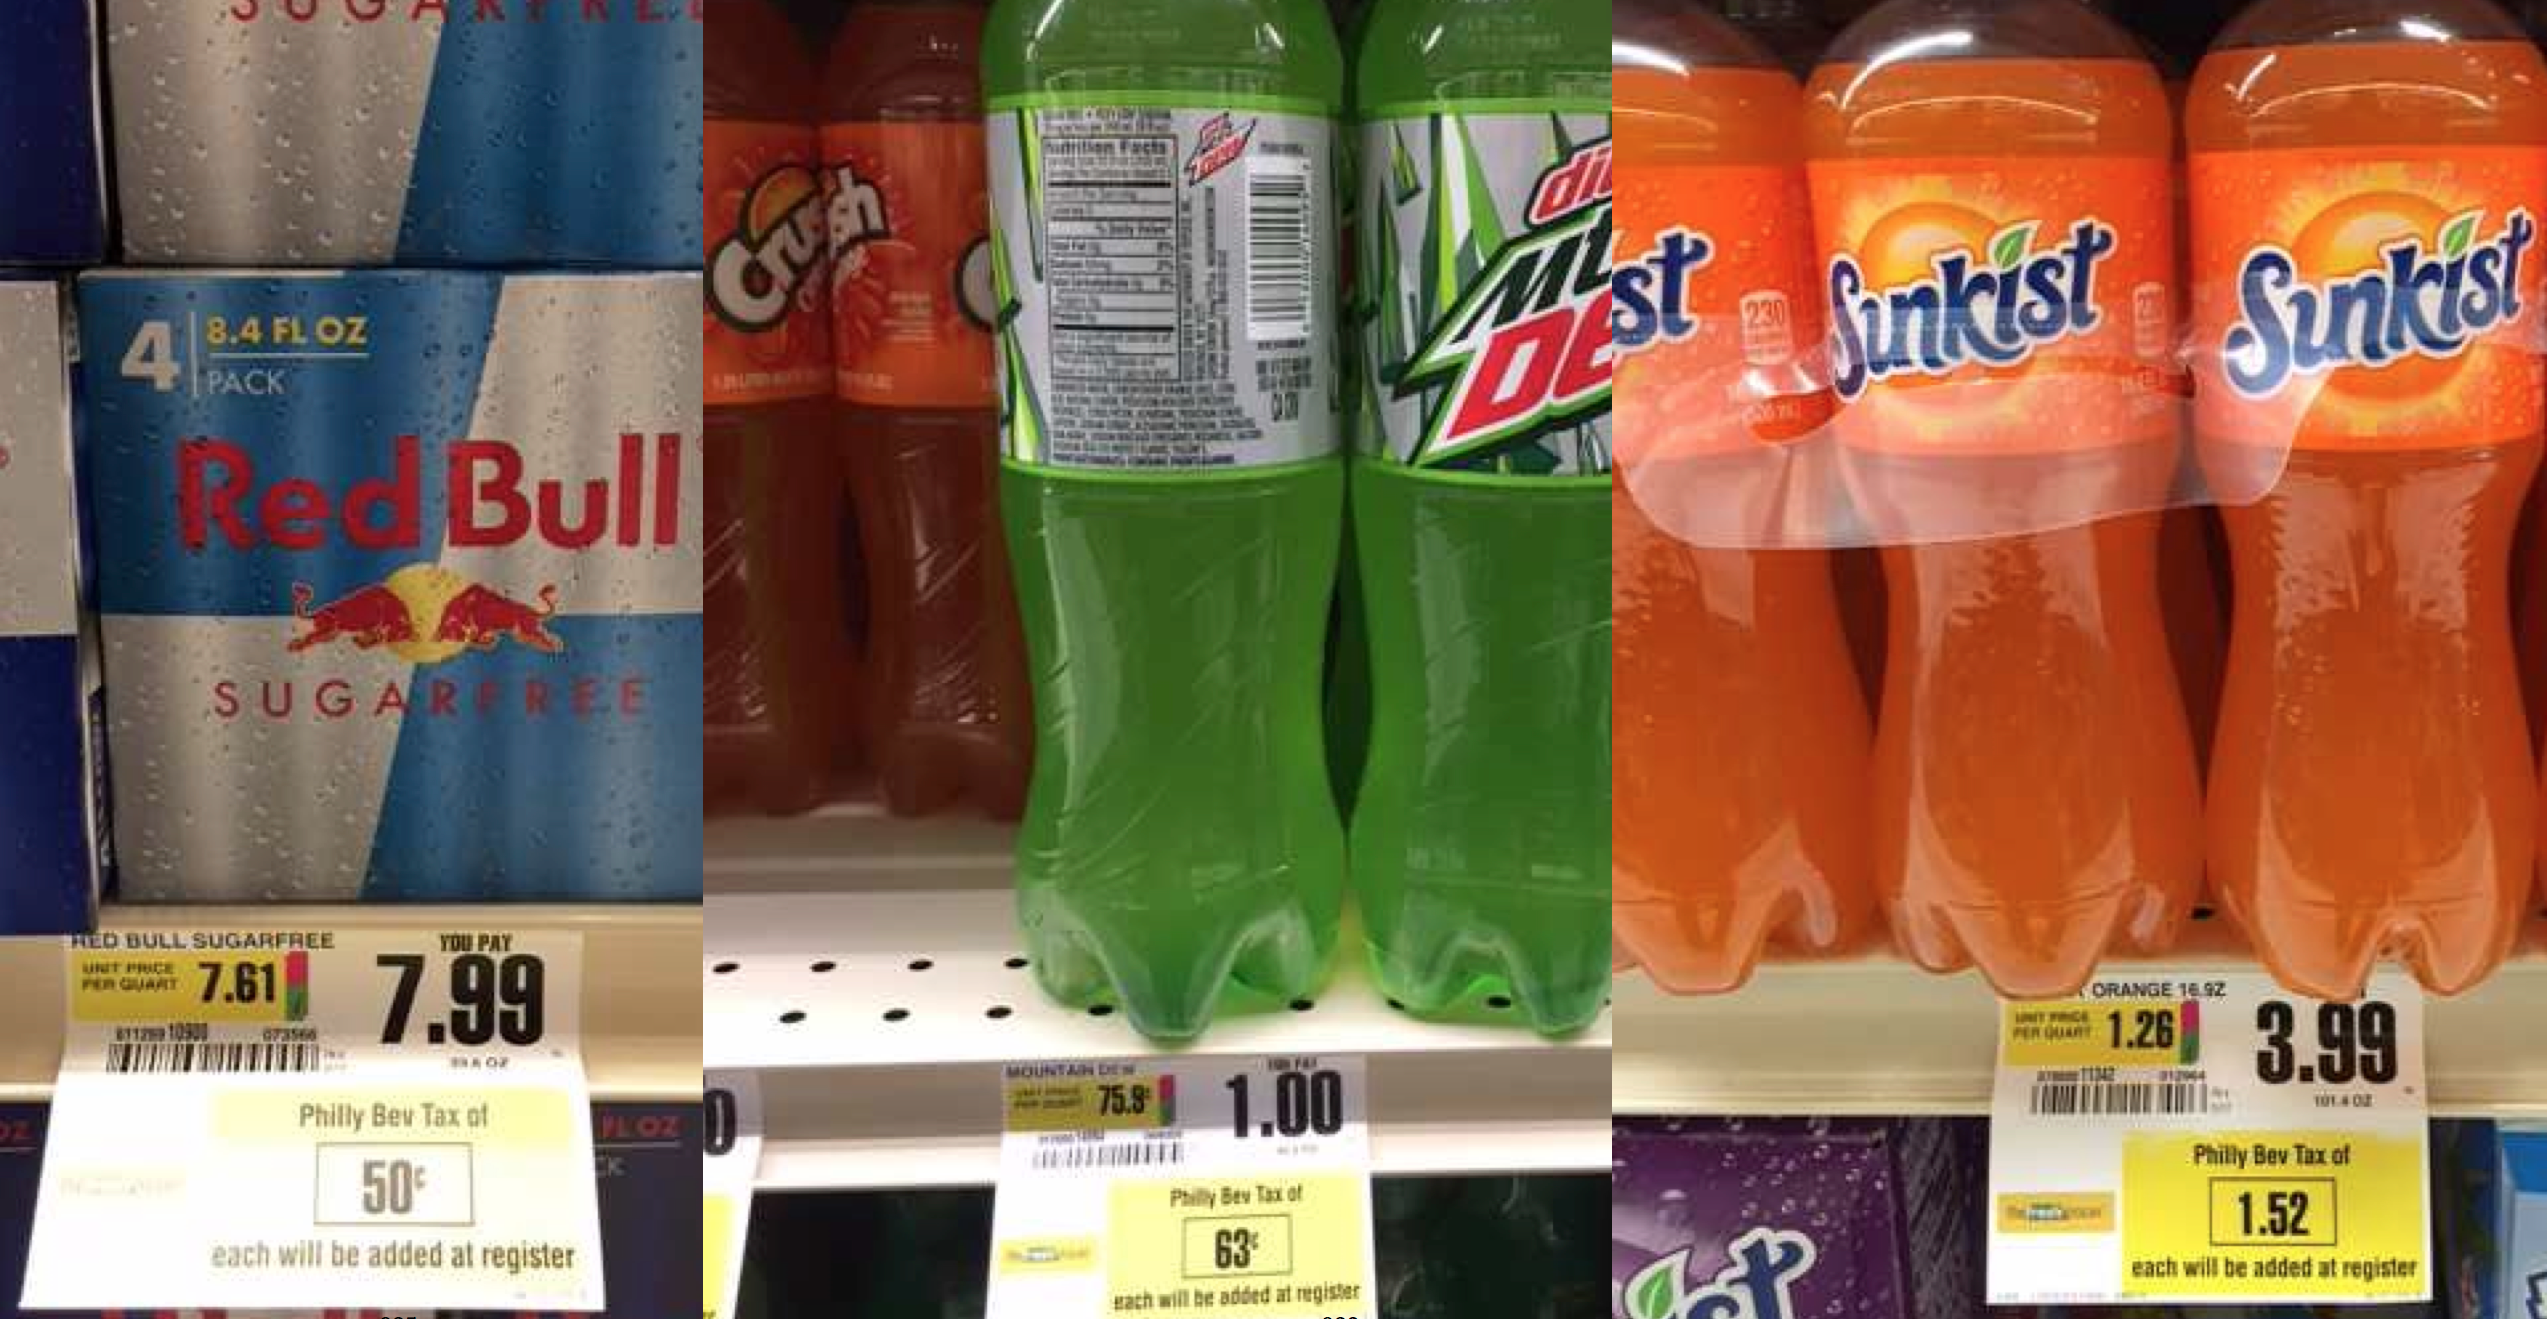 Philadelphia Learns That Soda Tax May Be A Bad Long-Term School Funding Solution